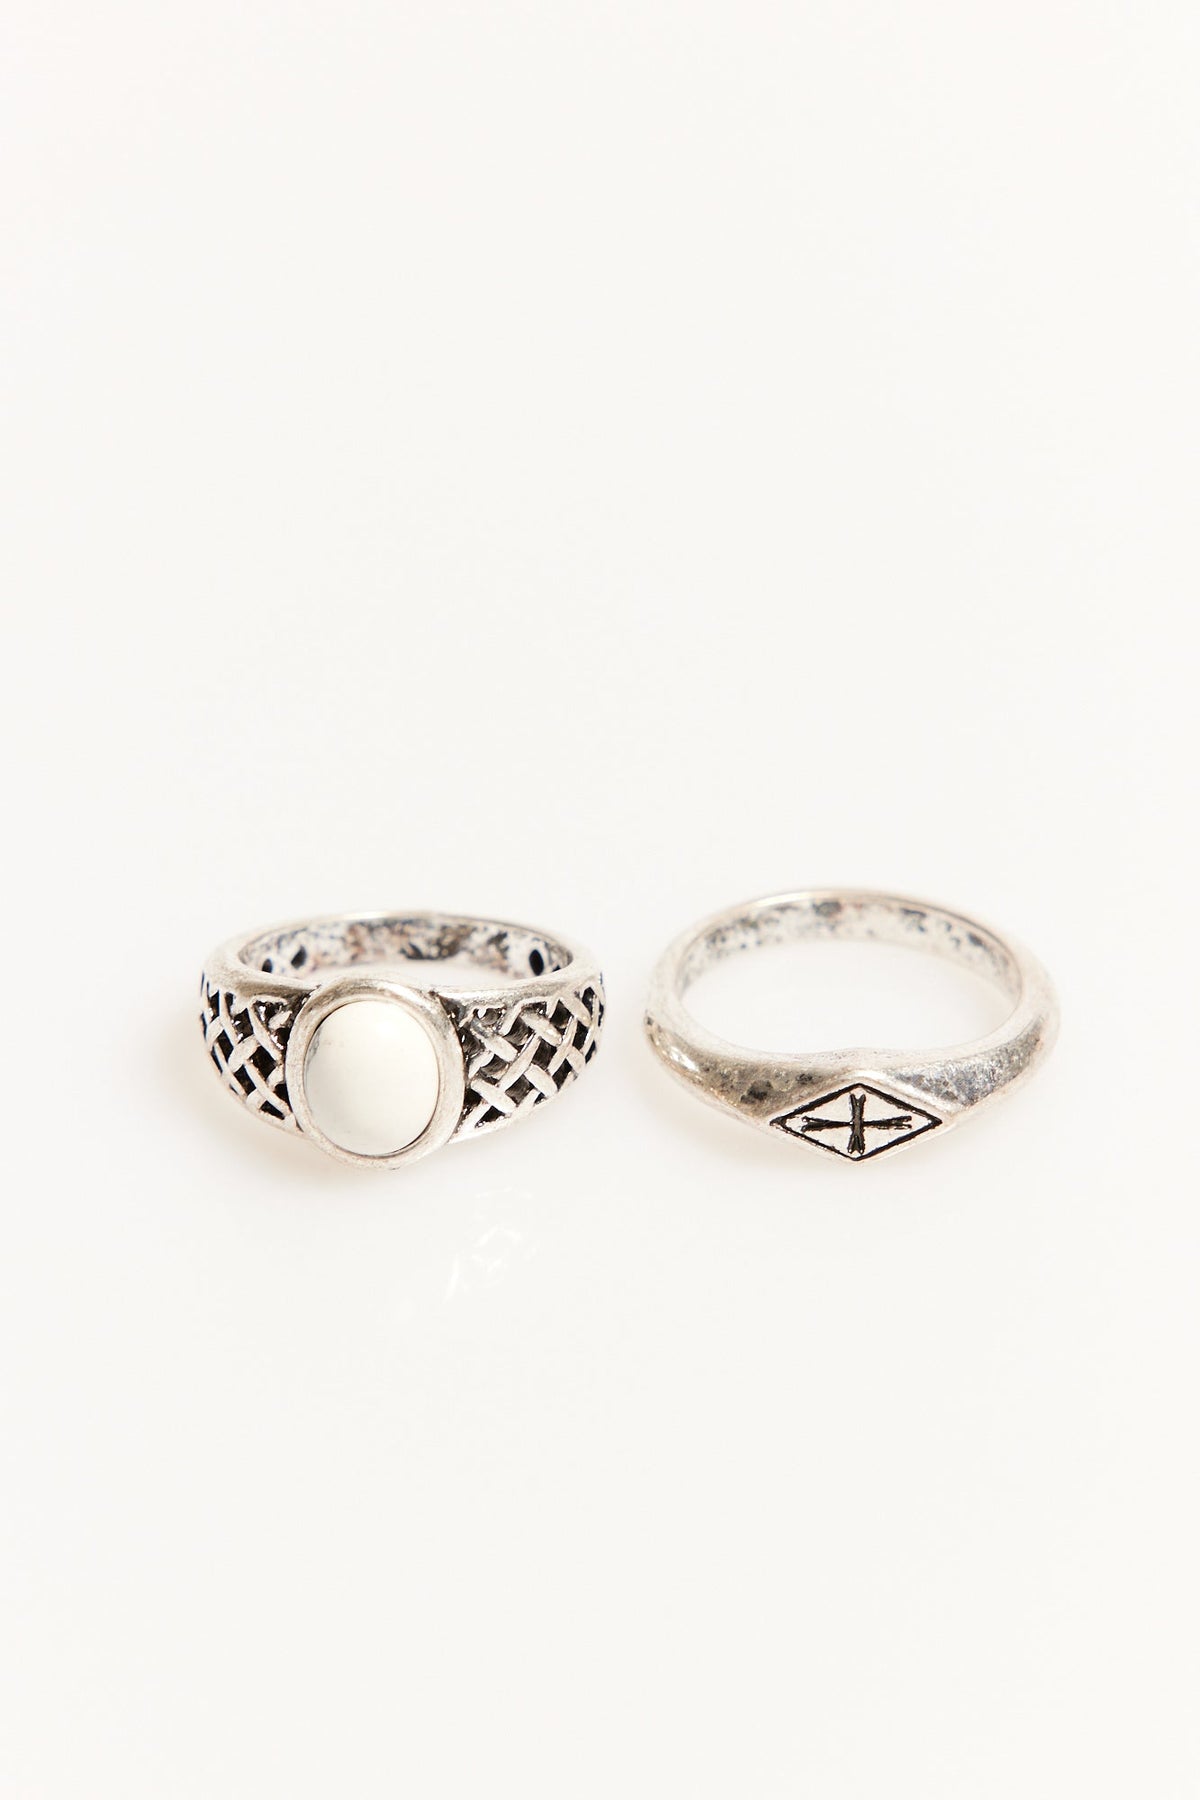 NTH  Ring Set Antique Silver